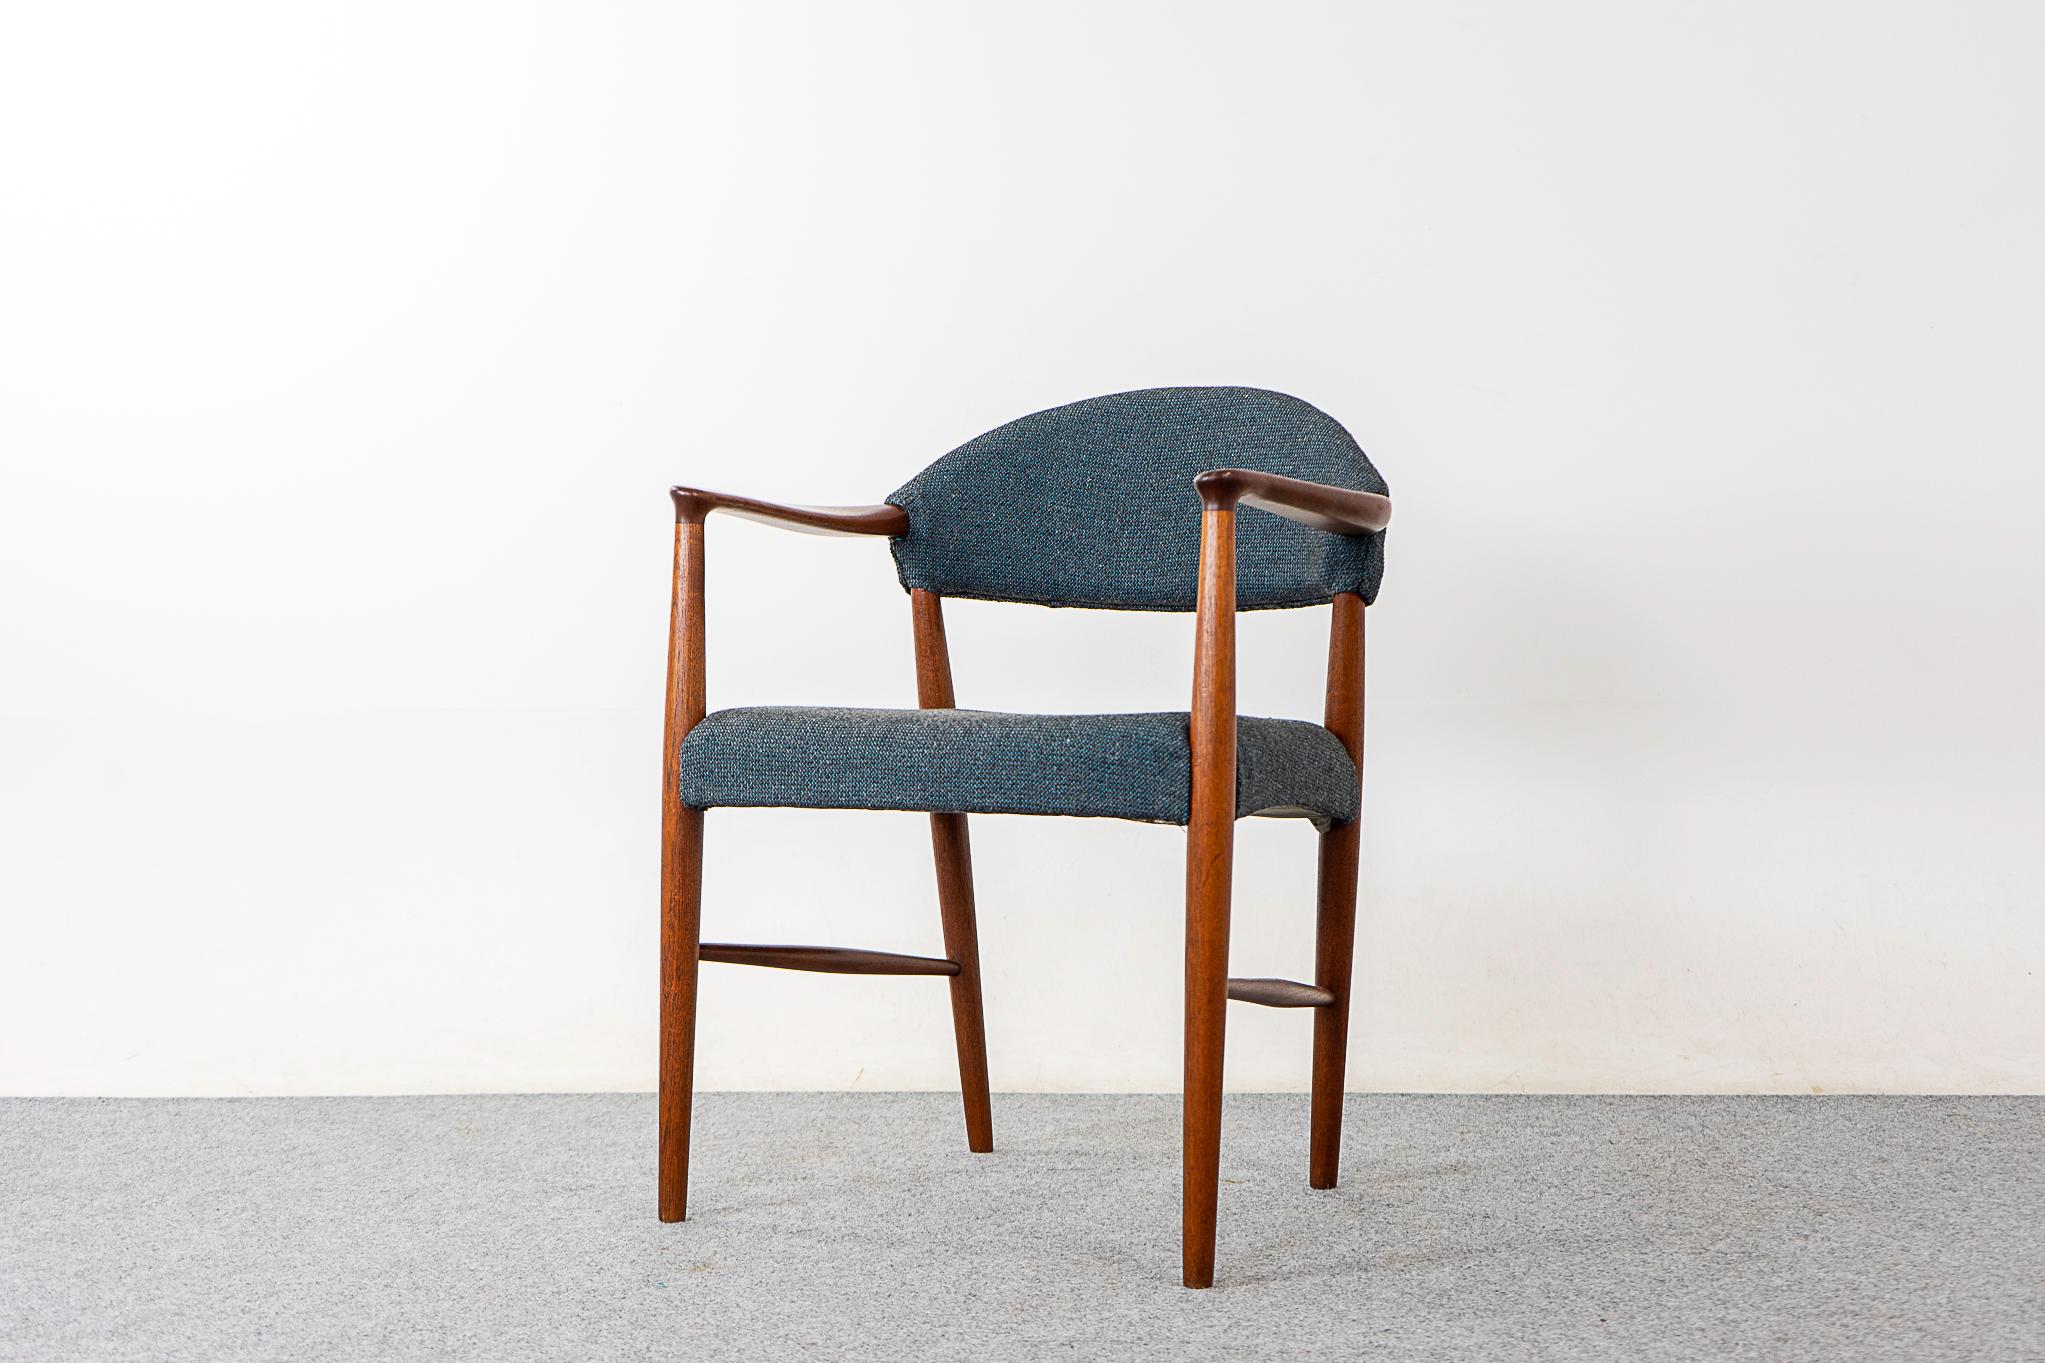 Teak Model 223 Danish arm chair by Kurt Olsen, circa 1960's. Sculptural solid wood frame with elegant details. Splayed tapering legs with spindle cross bars. Lovely grey wool upholstery.

Please inquire for remote and international shipping.